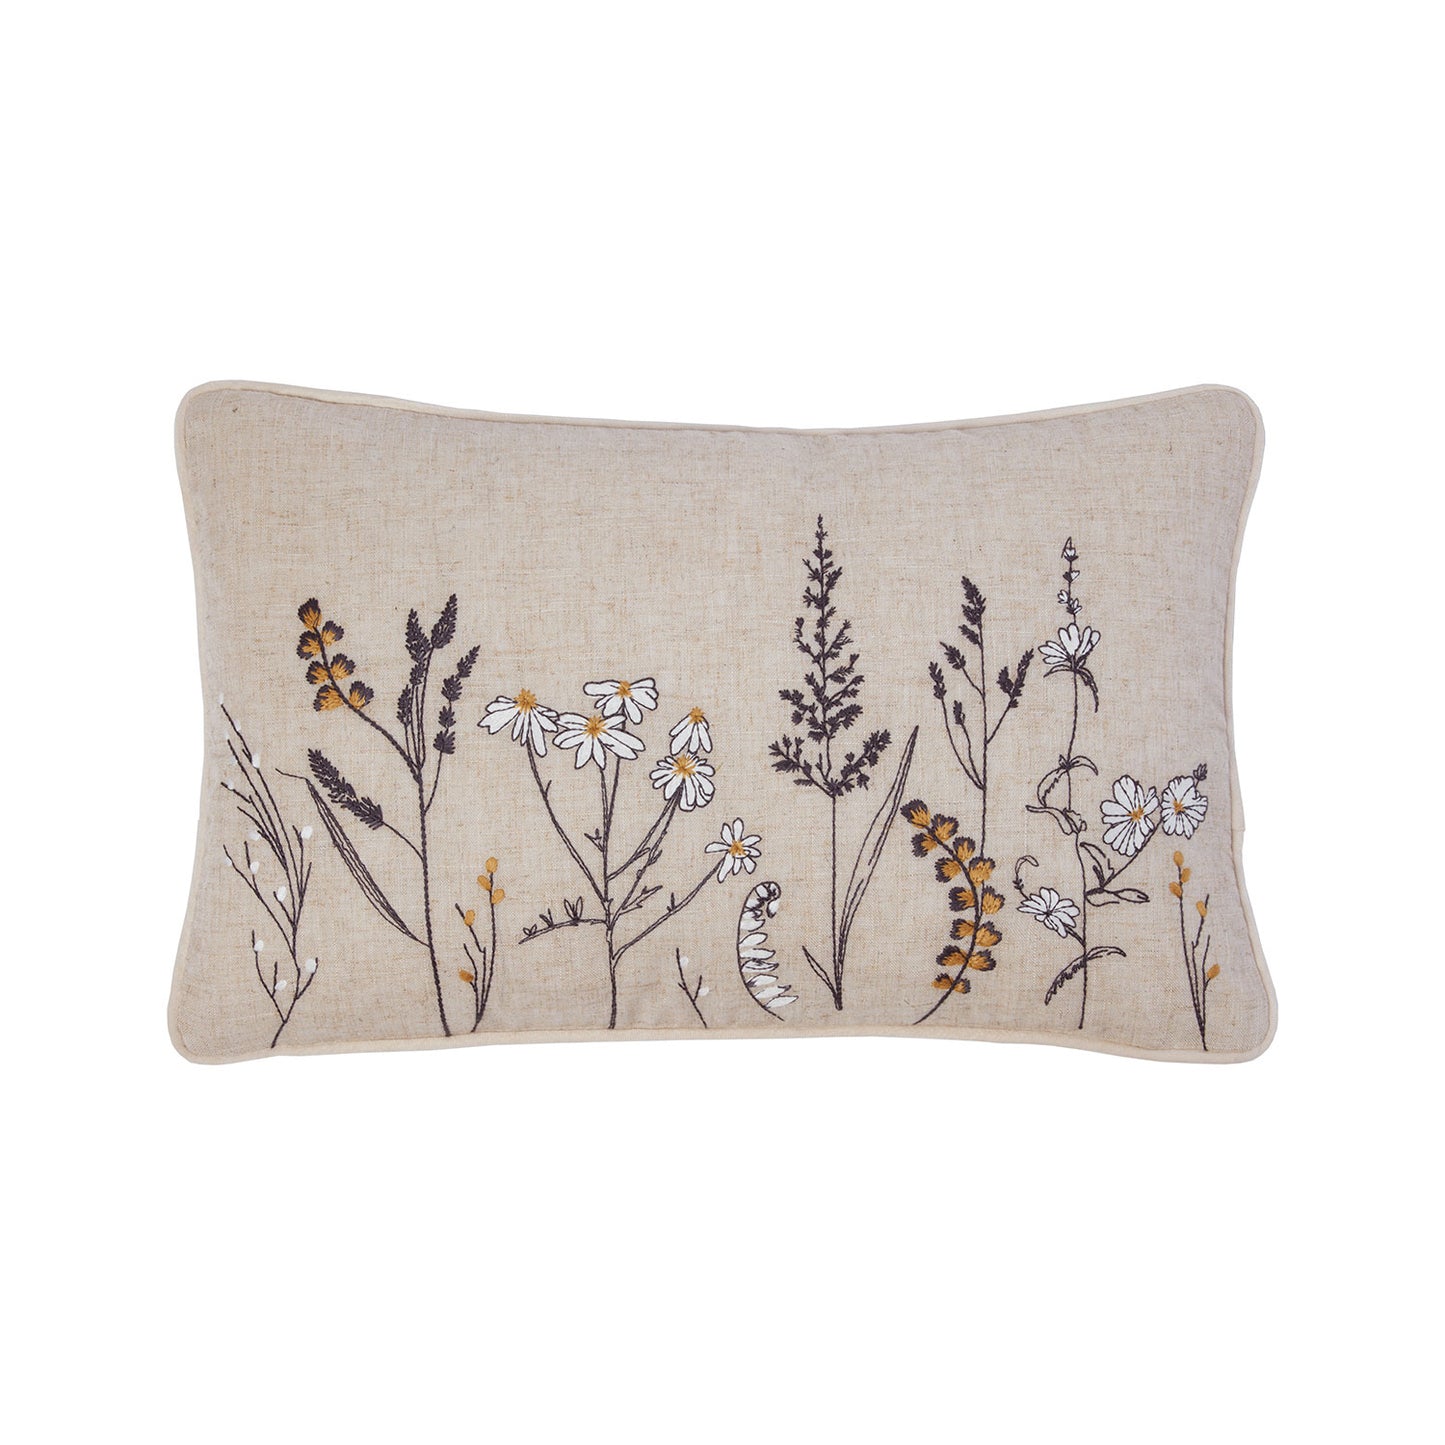 Becky Natural Widlflower Embroidered Cushion (30cm x 50cm)